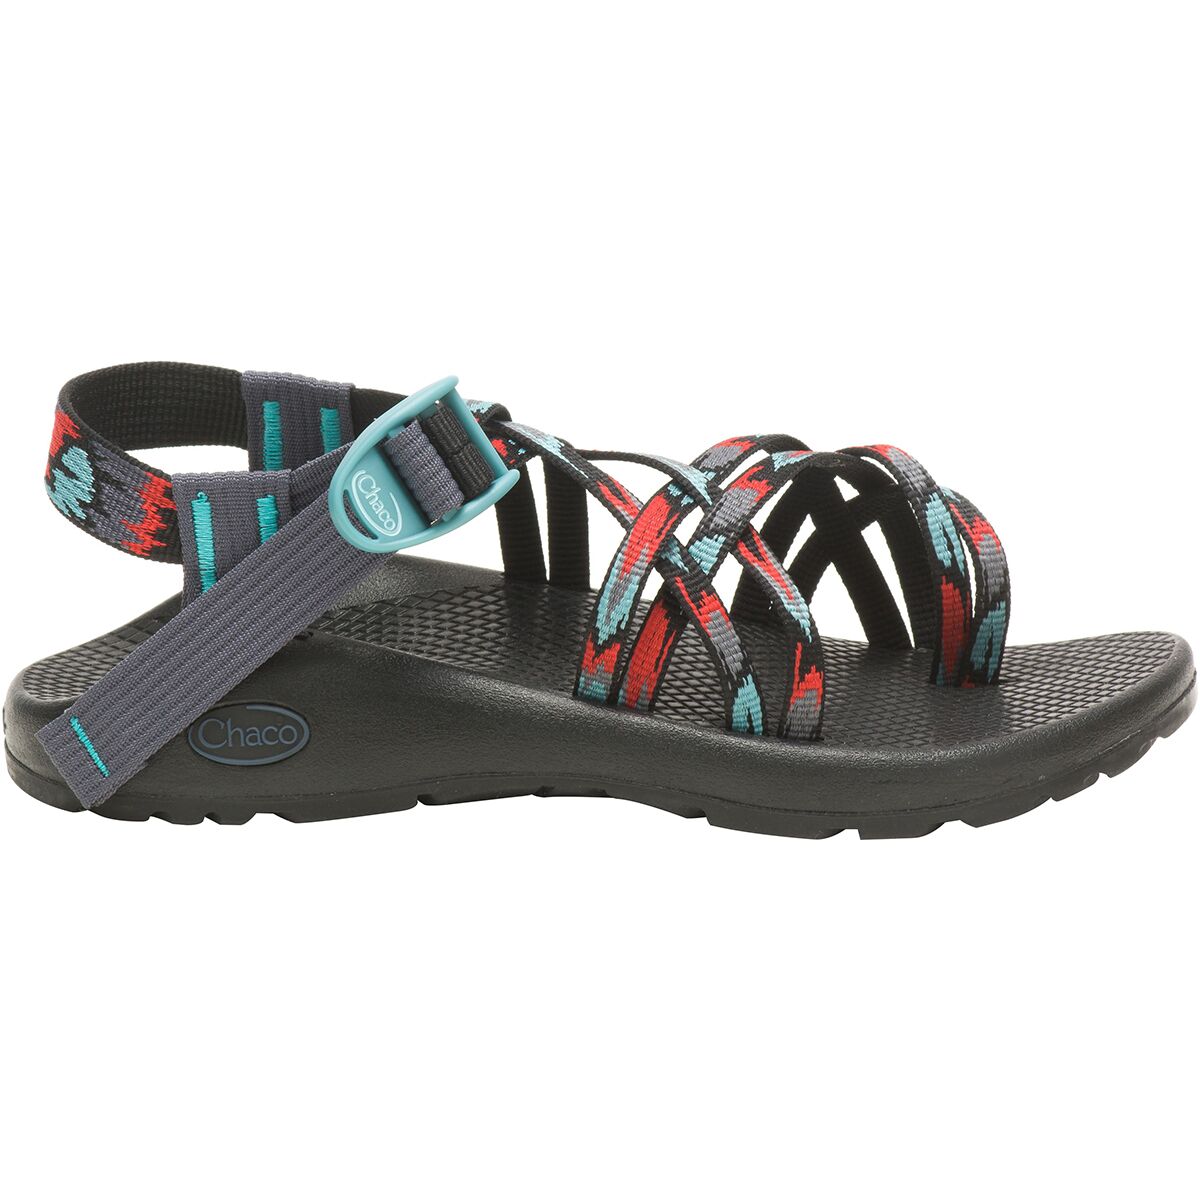 Chaco ZX/2 Classic Wide Sandal - Women's